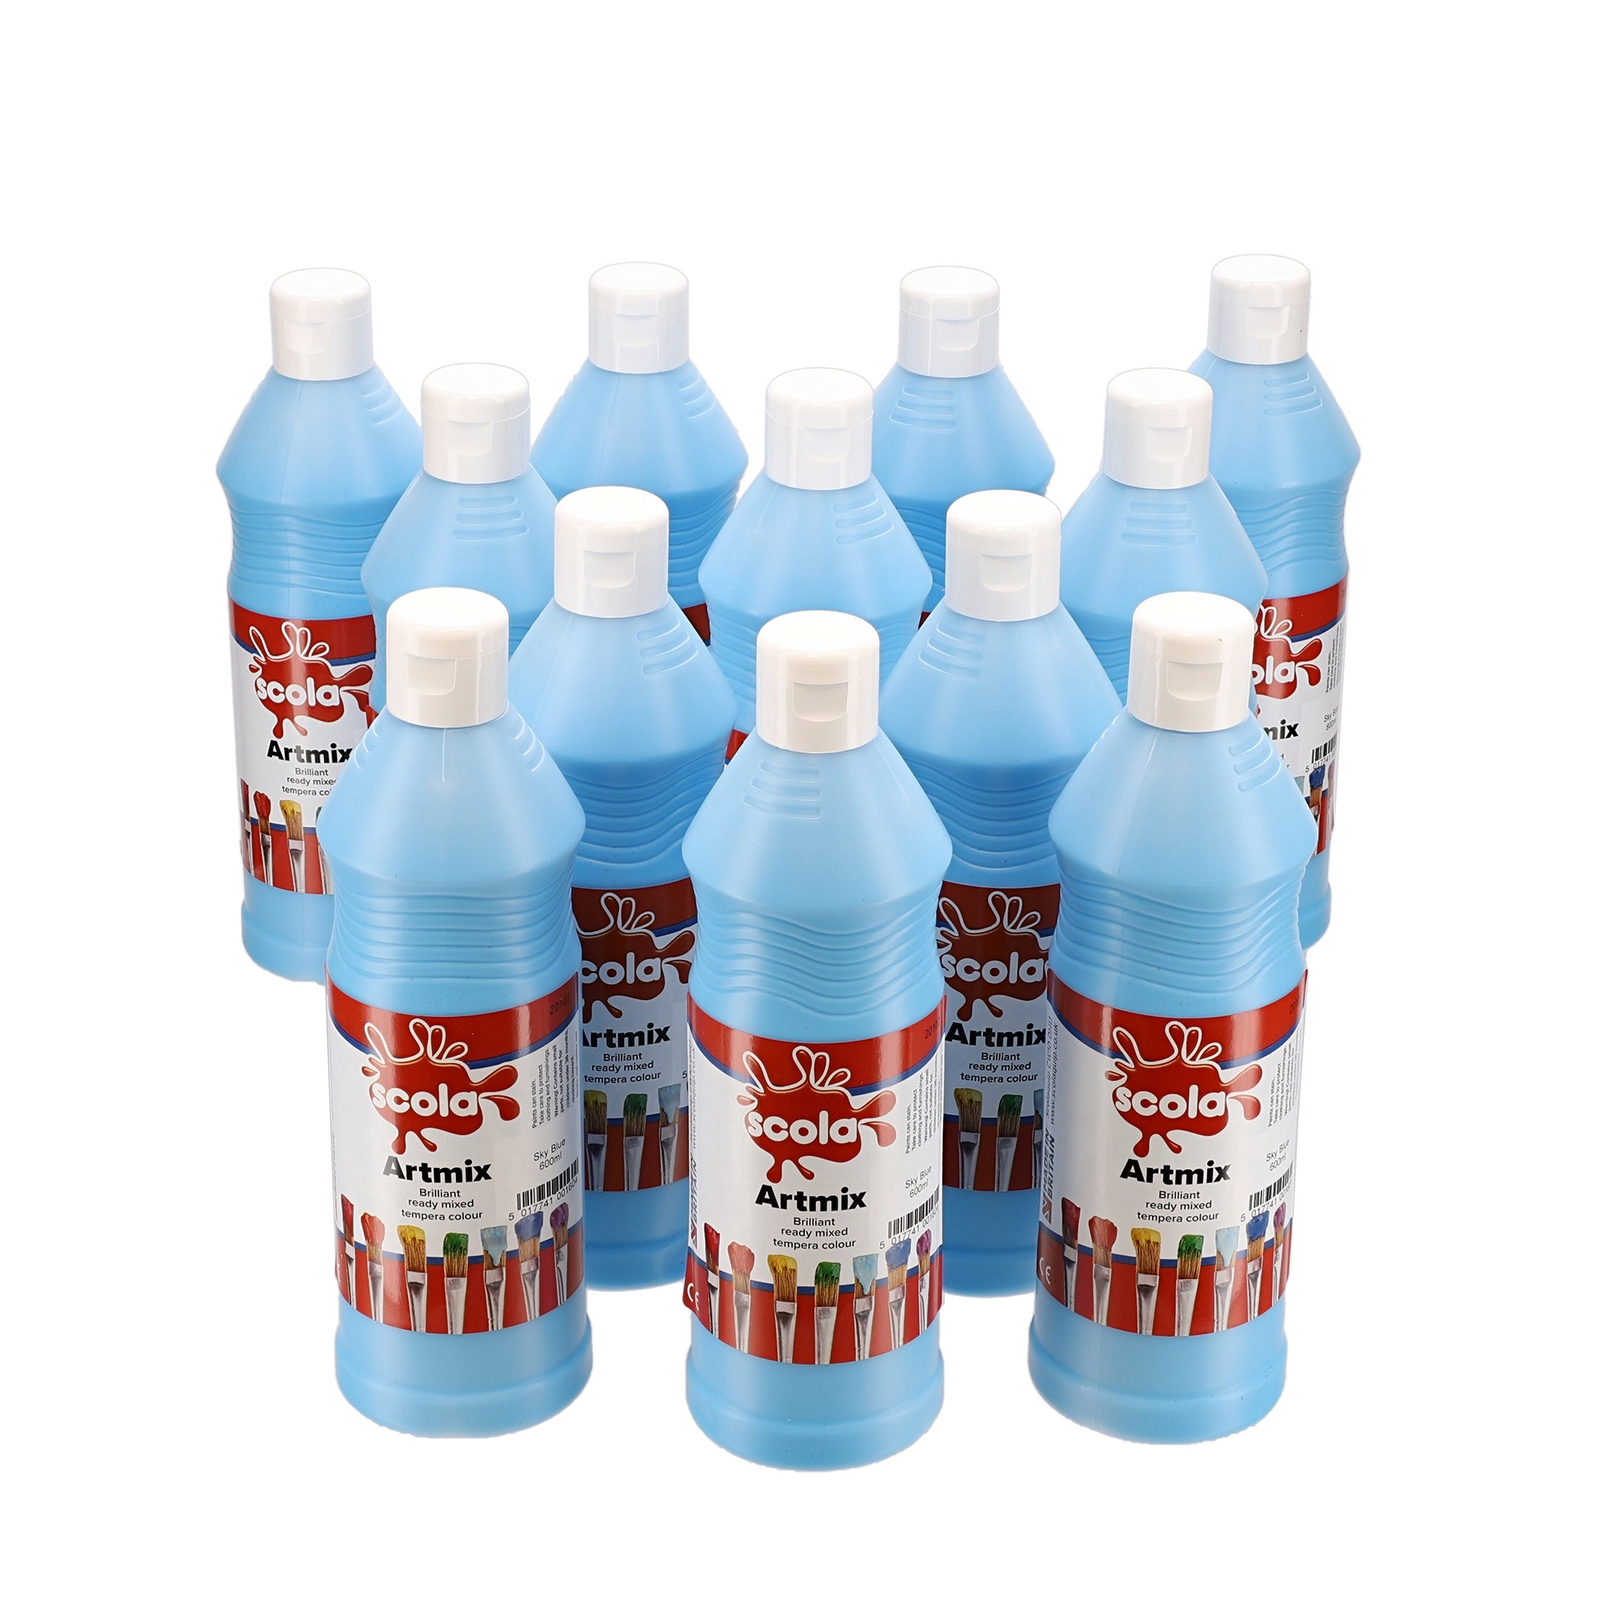 Scola Sky Blue  Artmix Ready Mixed Paint - 600ml - Pack of 12